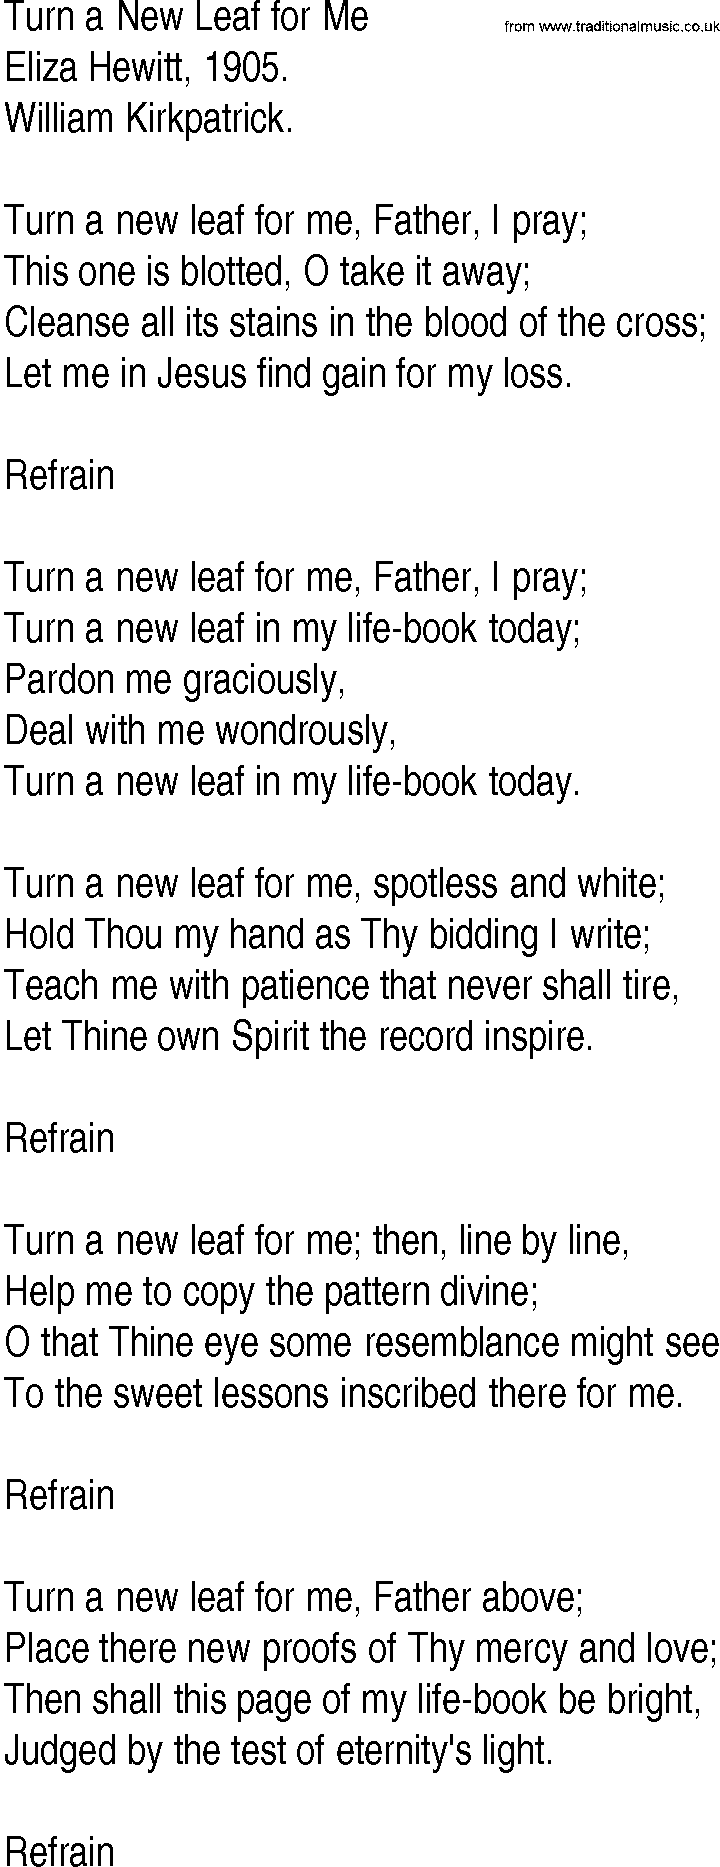 Hymn and Gospel Song: Turn a New Leaf for Me by Eliza Hewitt lyrics